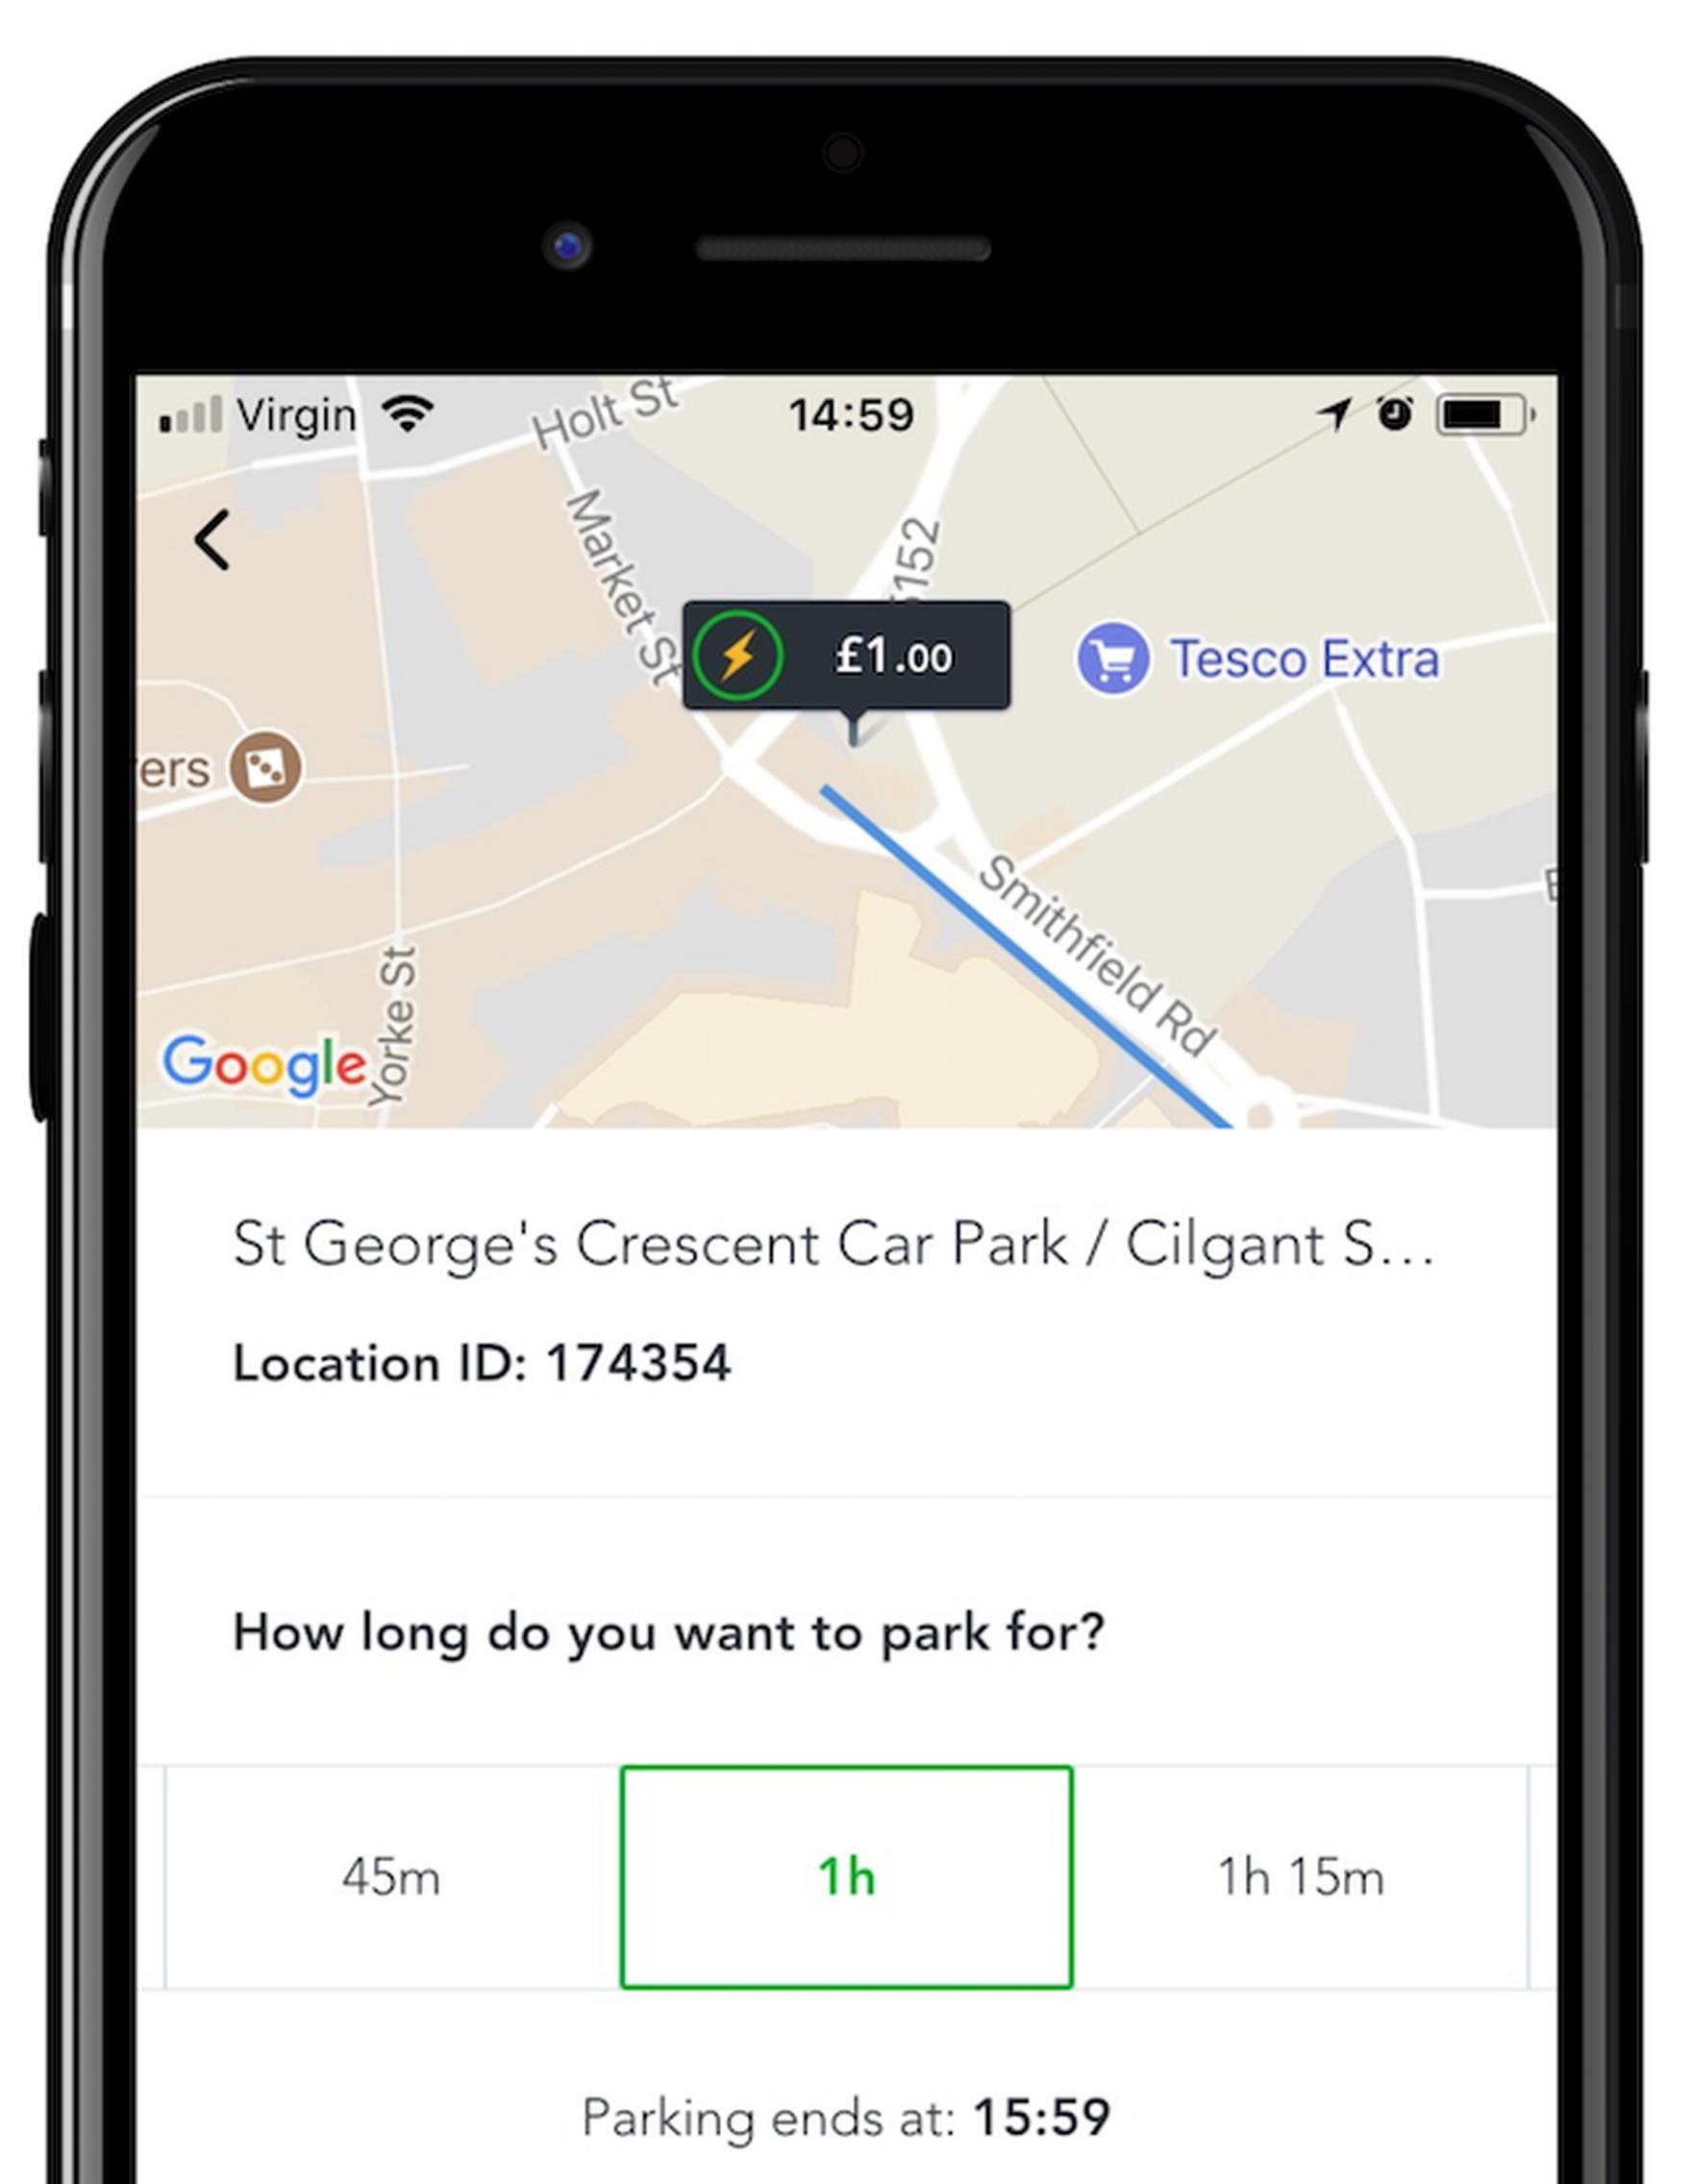 People using Wrexham council car parks can now use the JustPark app to pay for their stay